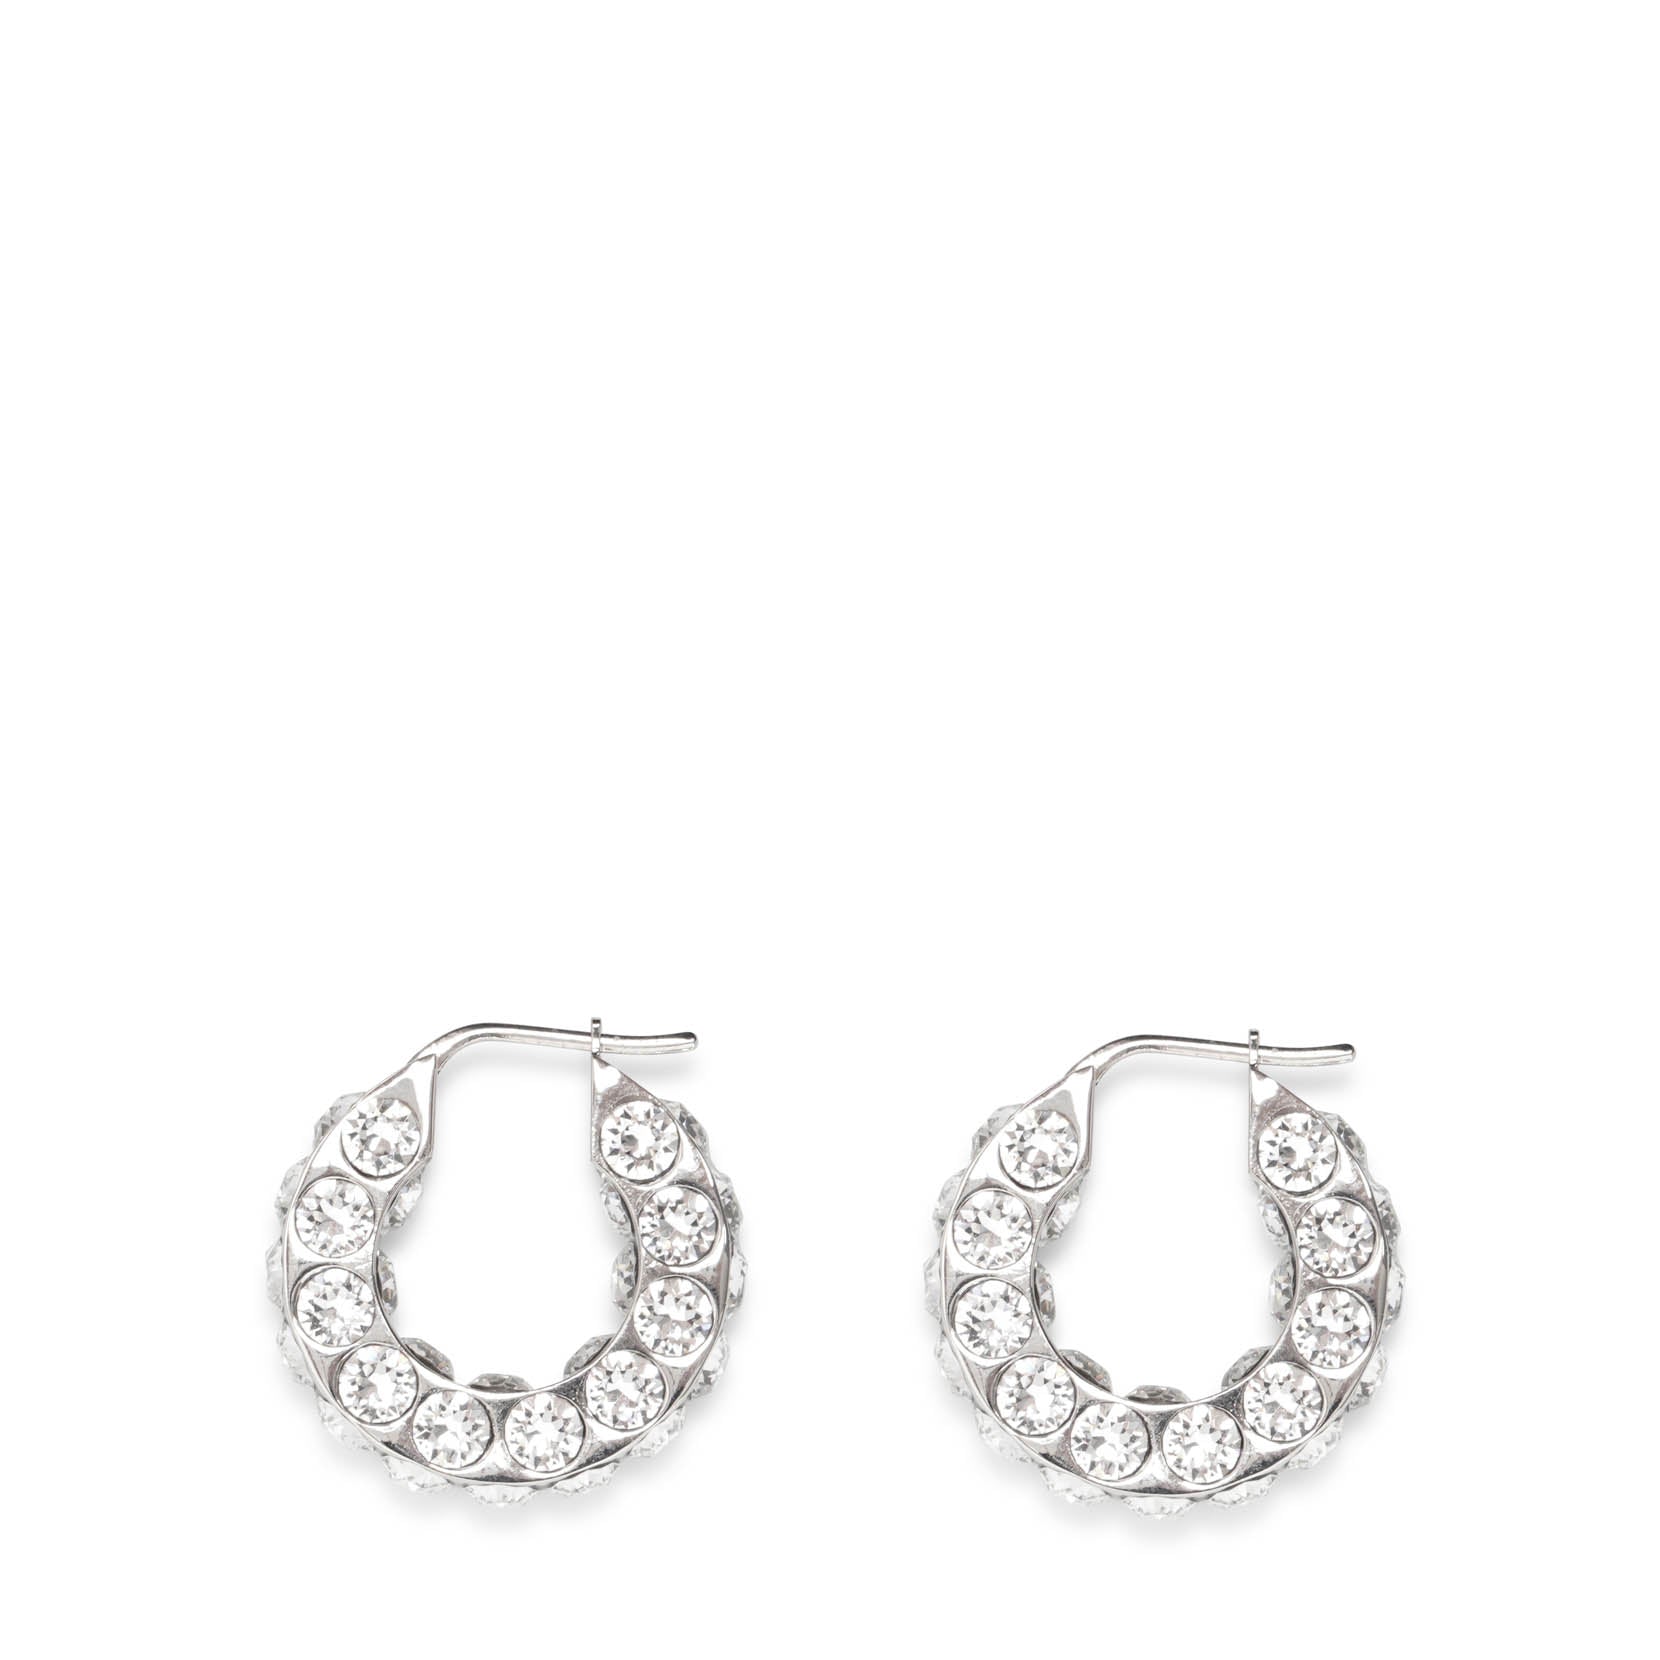 Amina Muaddi Jah Hoop Small White And Silver Crystal Earrings